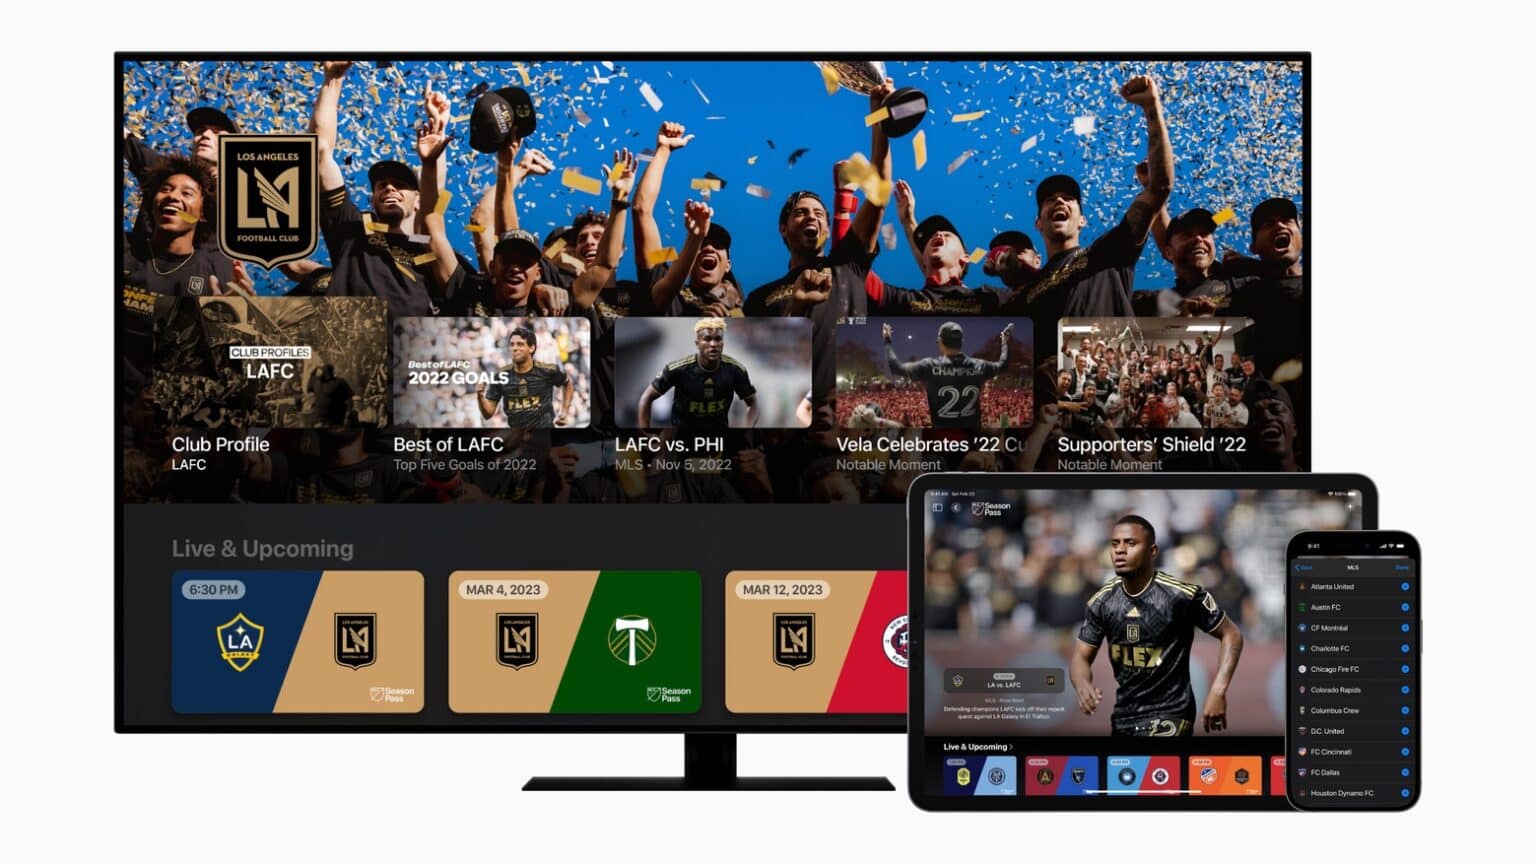 Watch Major League Soccer on a wide variety of devices, including TVs, tablets and phones.